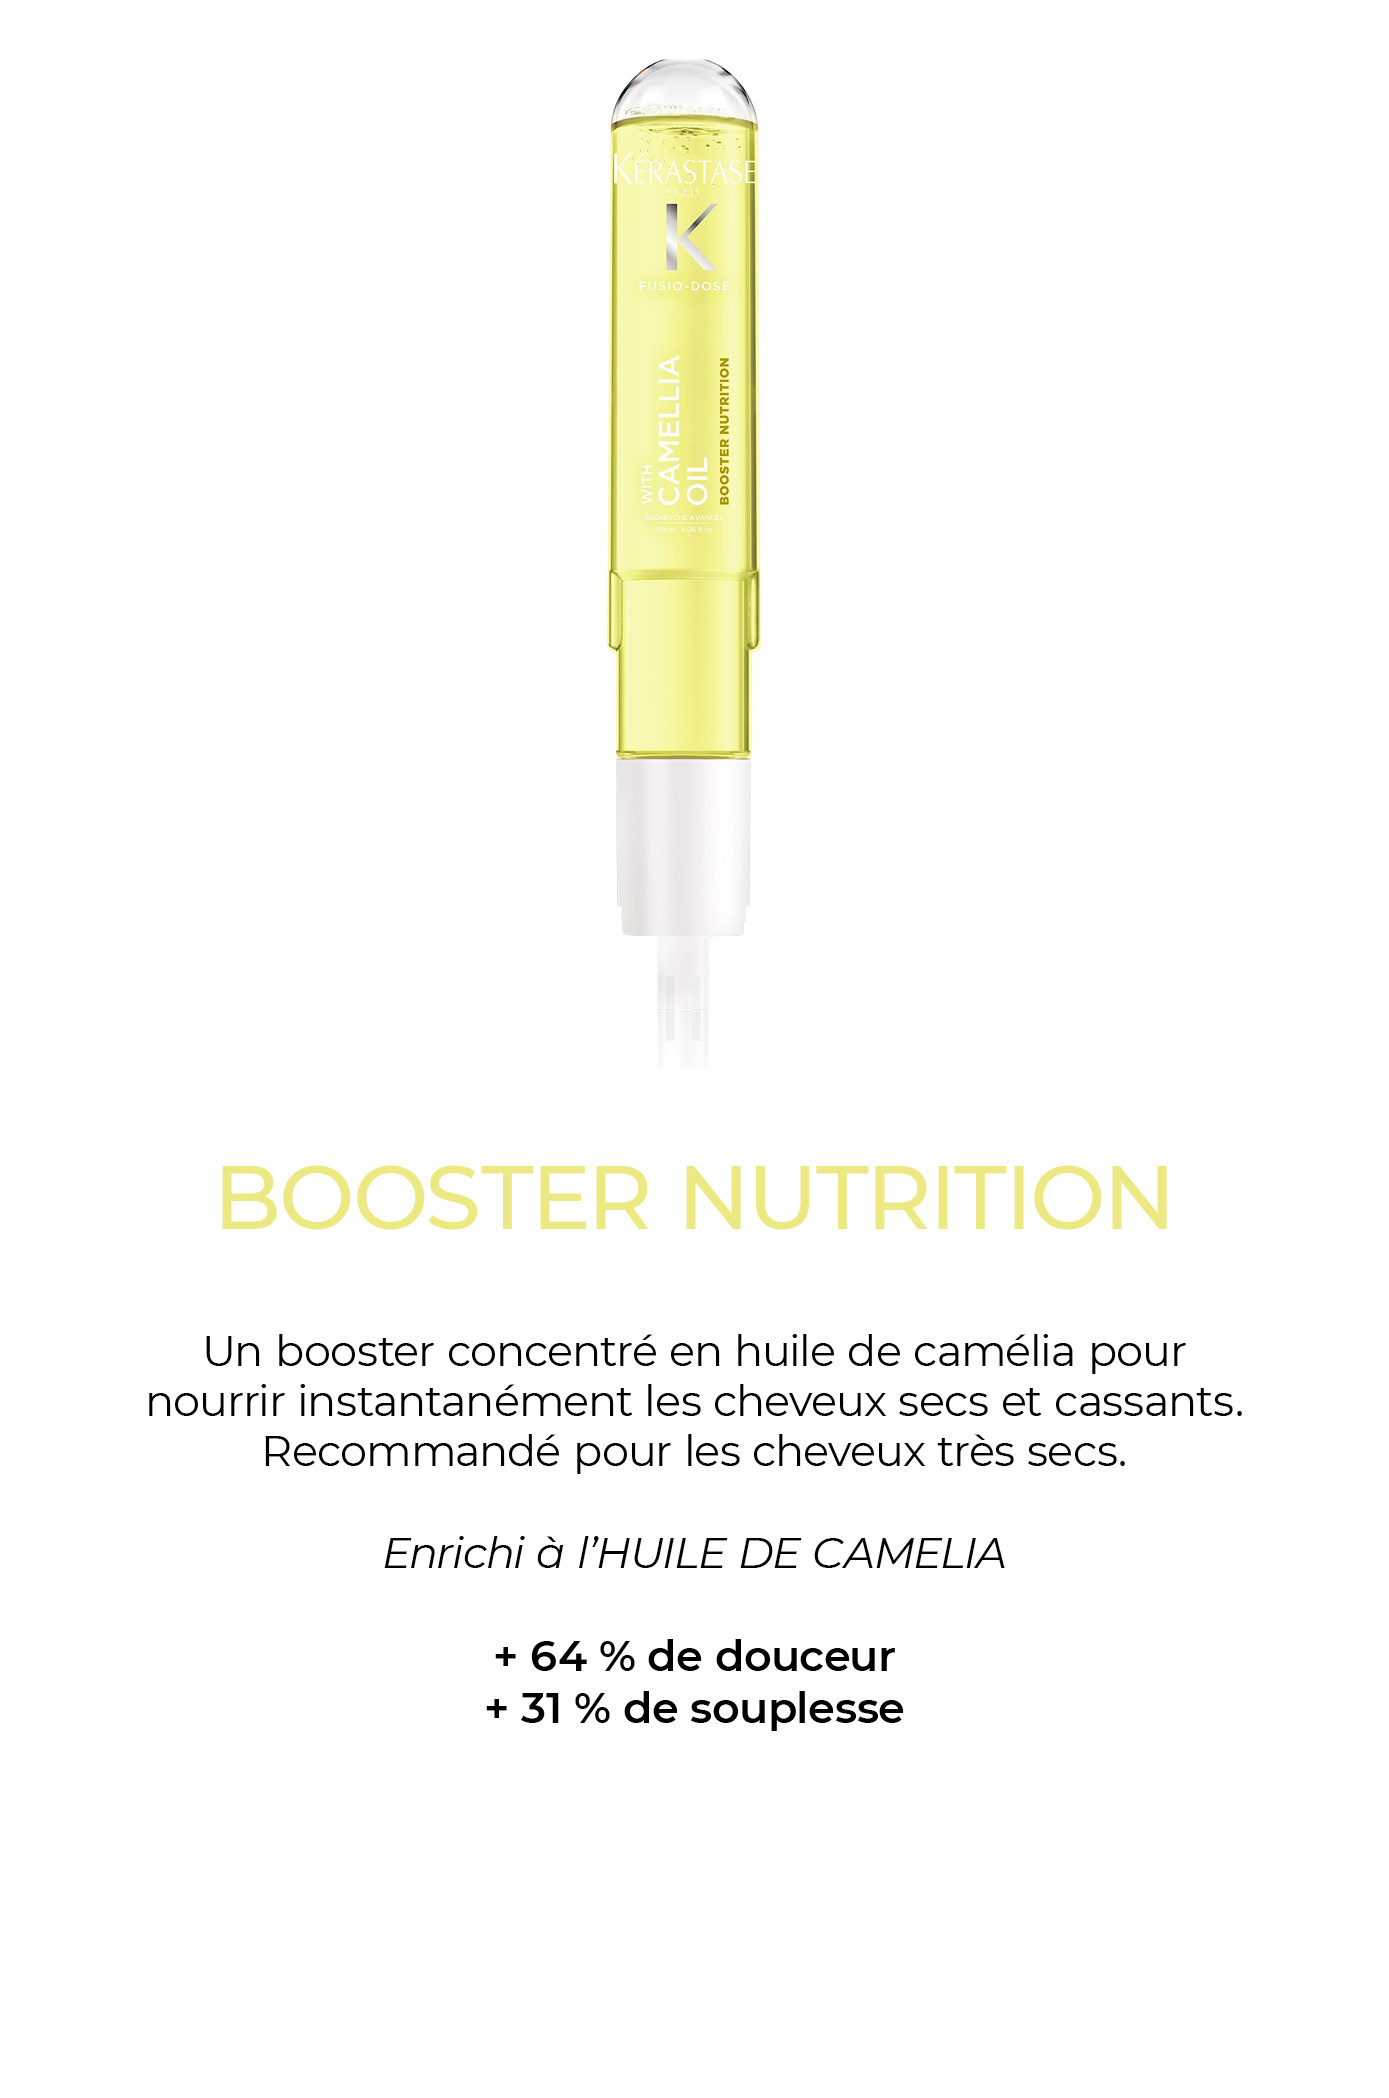 Booster Nutrition